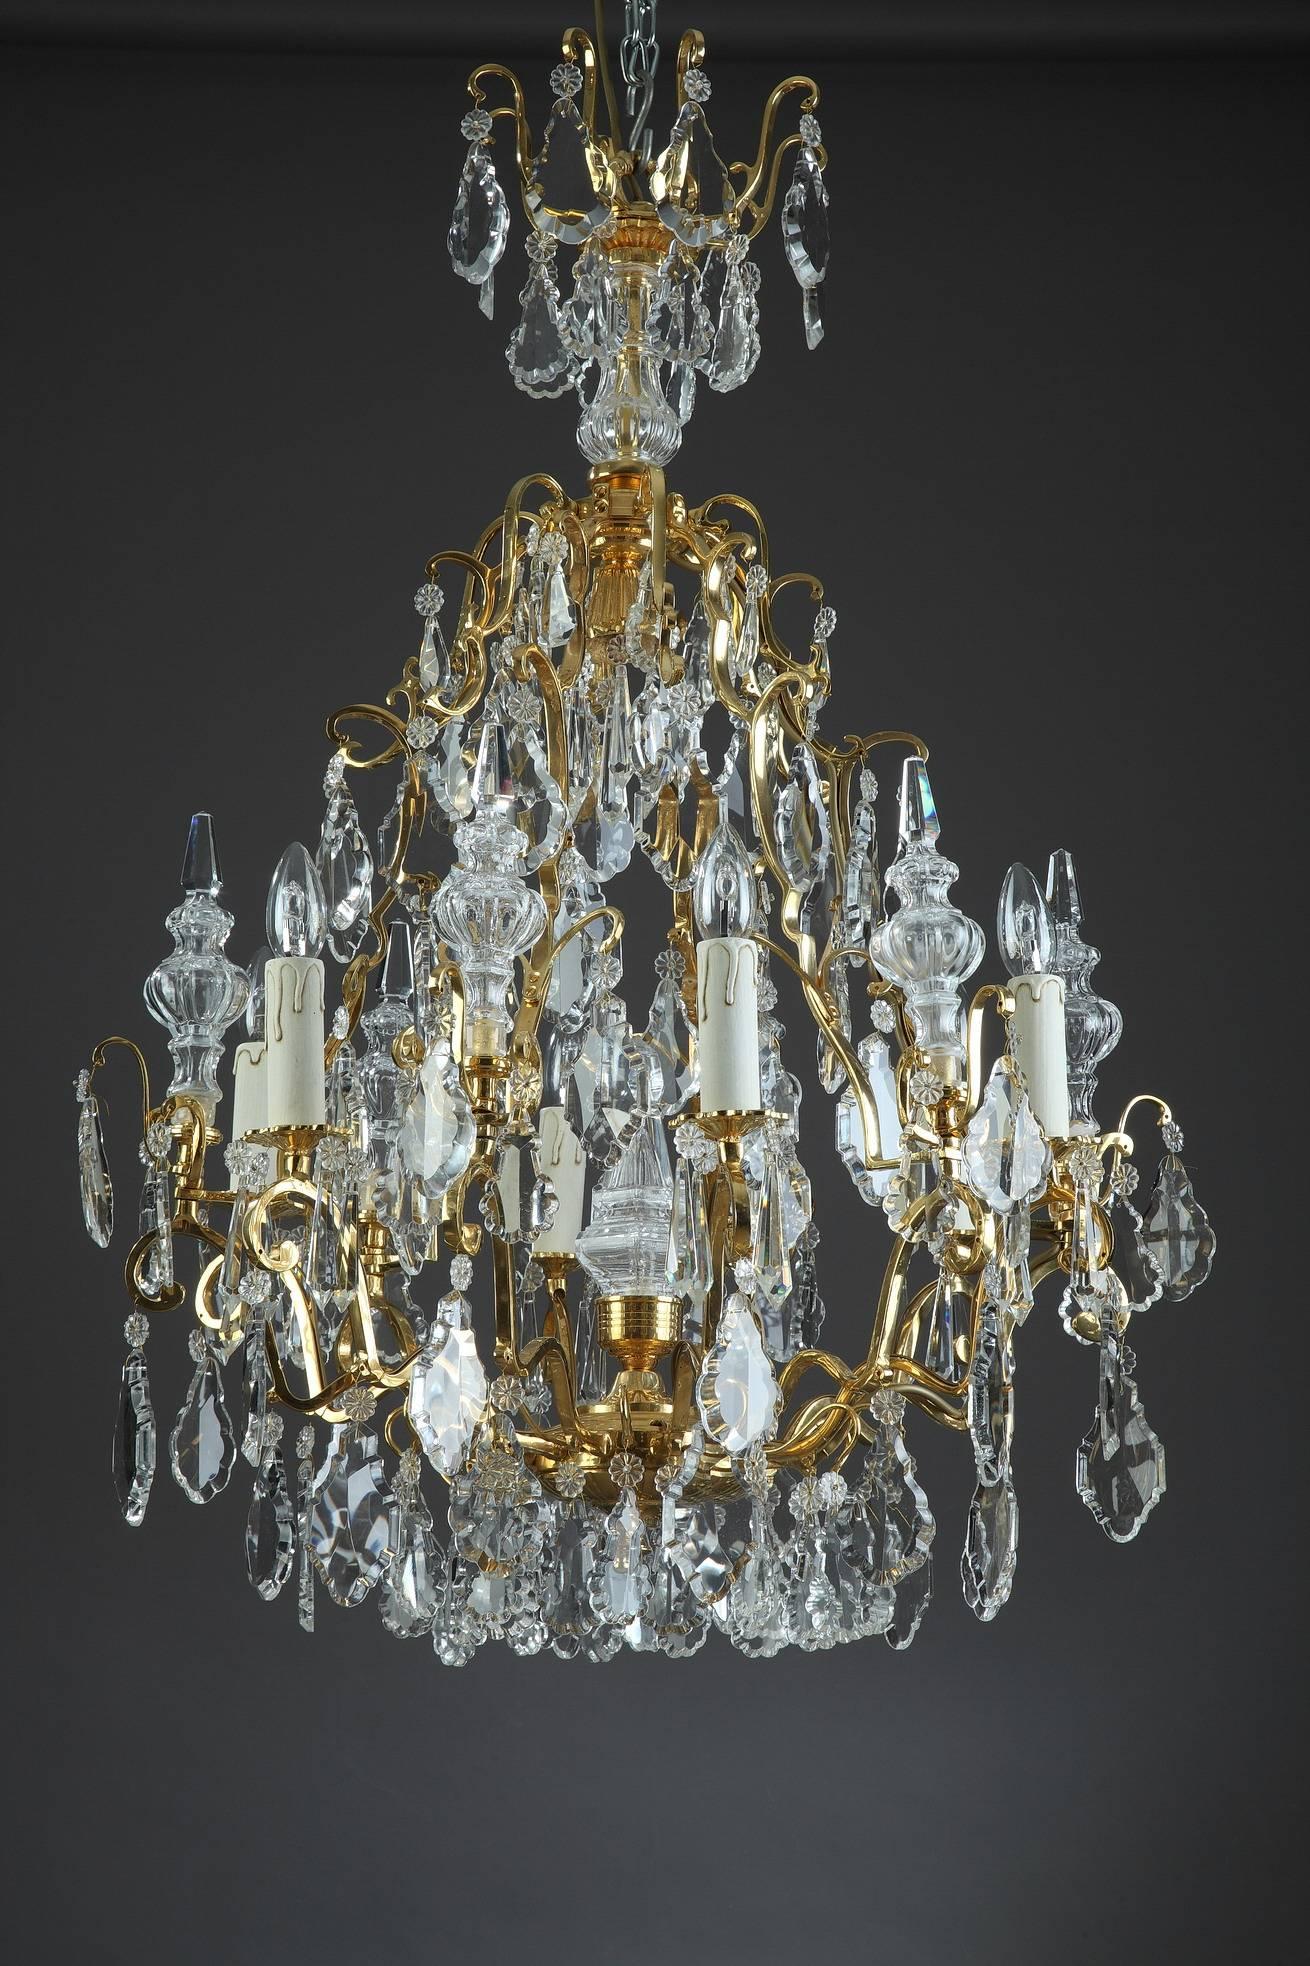 Pair of chandeliers with six curved arms of light and 6 daggers, richly decorated with garlands, drop-hung drippans and slice-cut drops in transparent crystal. Gilt and chiseled bronze mounts, embellished with foliage. Napoleon III period.